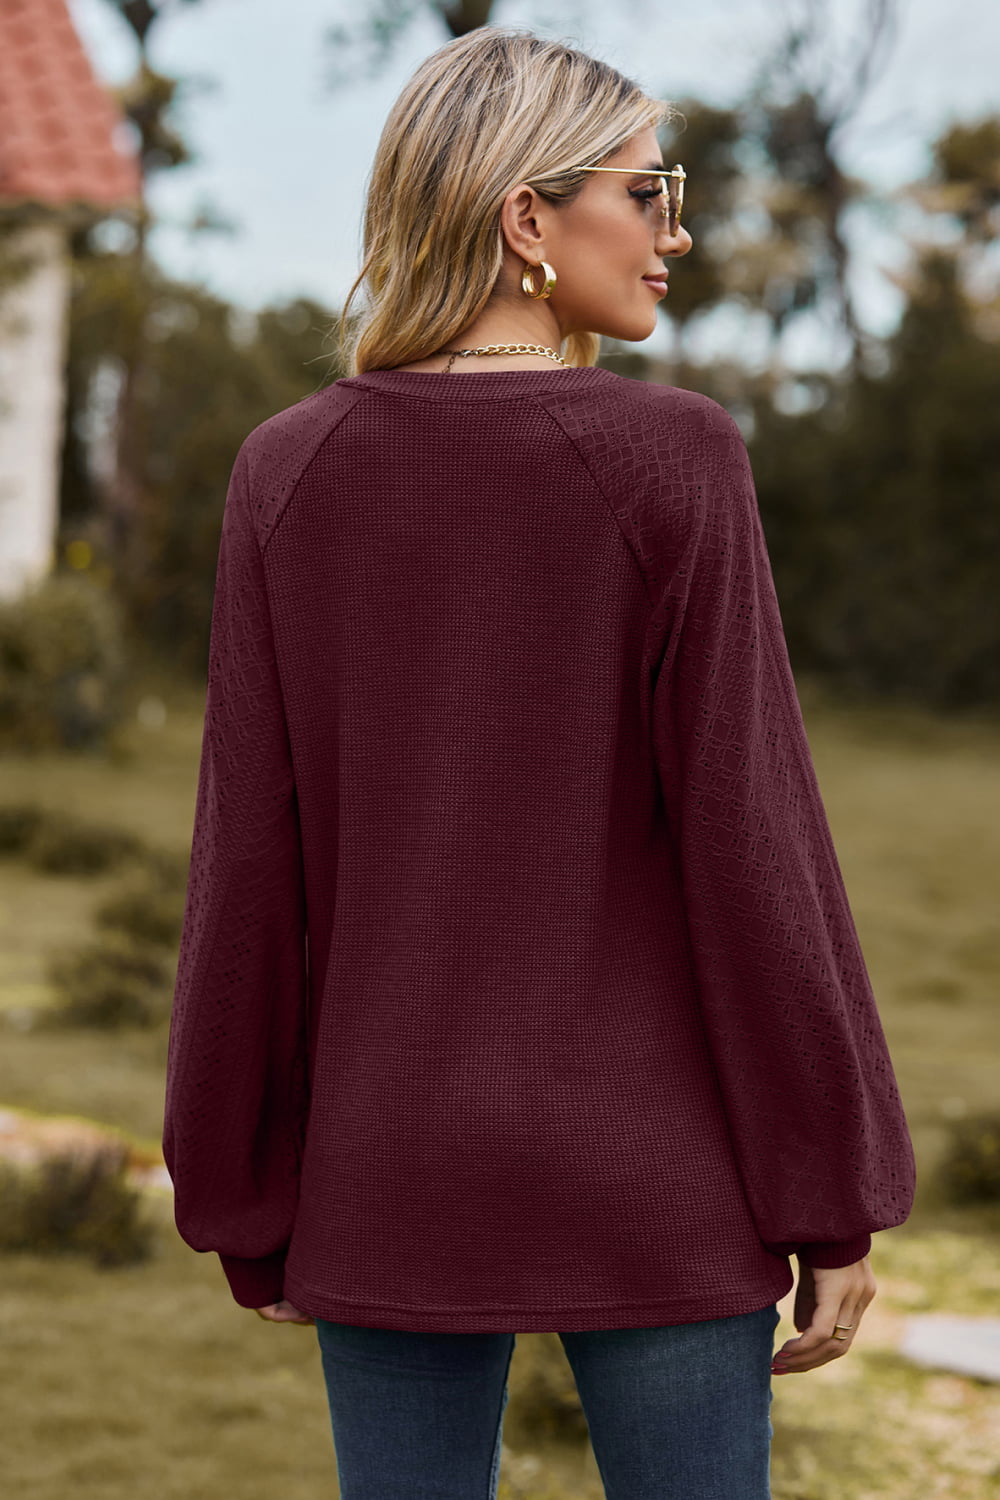 Notched Neck Raglan Sleeve Blouse - Women’s Clothing & Accessories - Shirts & Tops - 21 - 2024